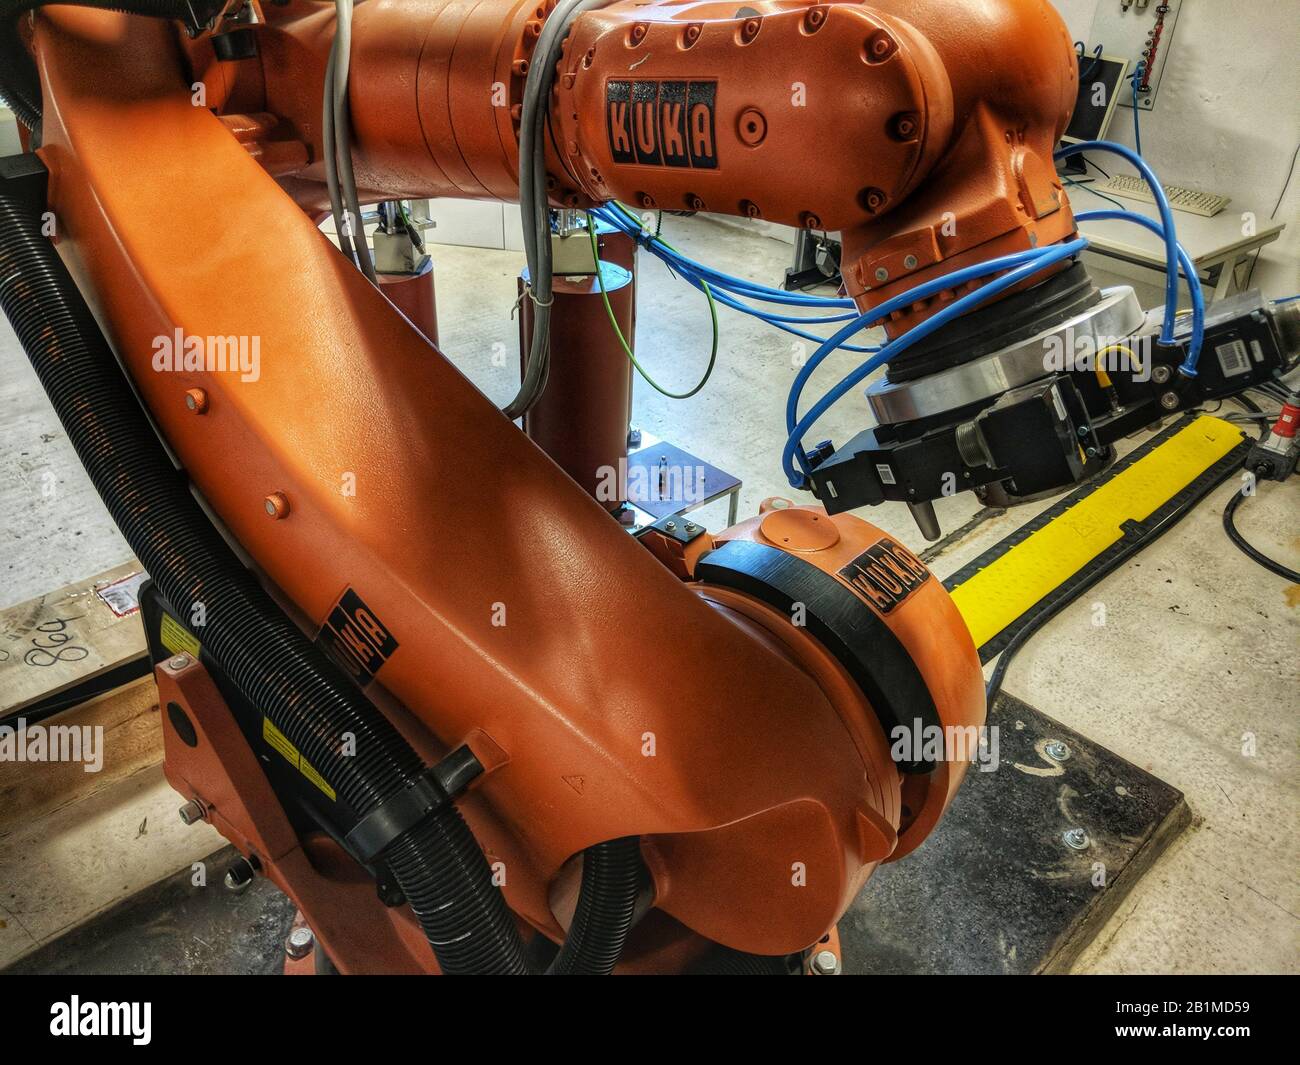 Cobots designed to share workspace with humans Stock Photo